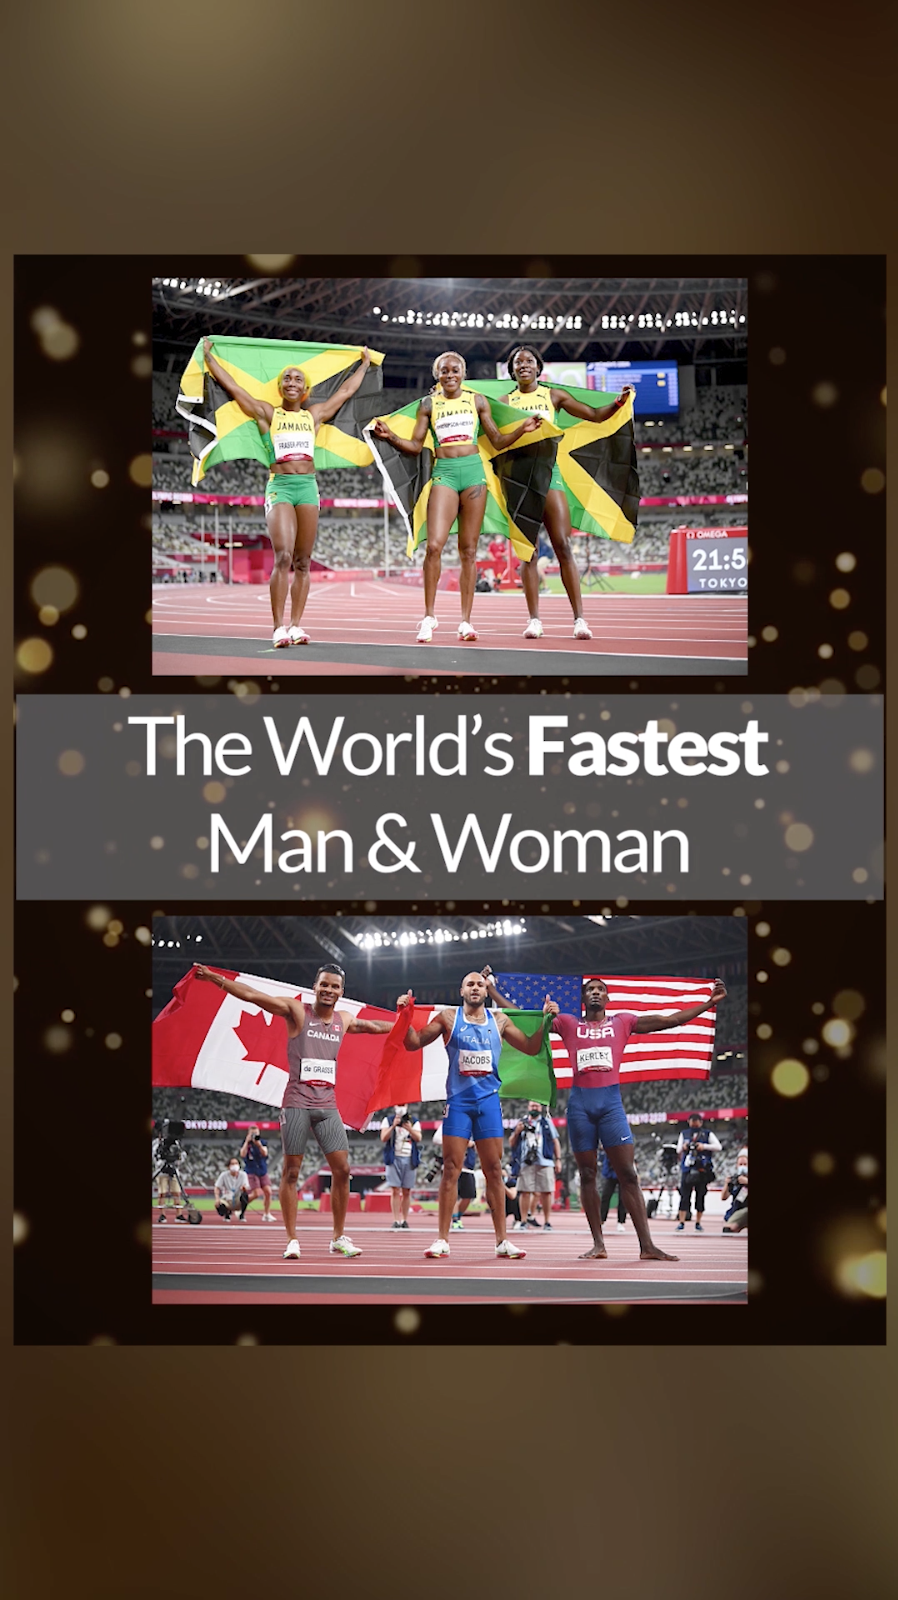 The World's Fastest Man & Woman